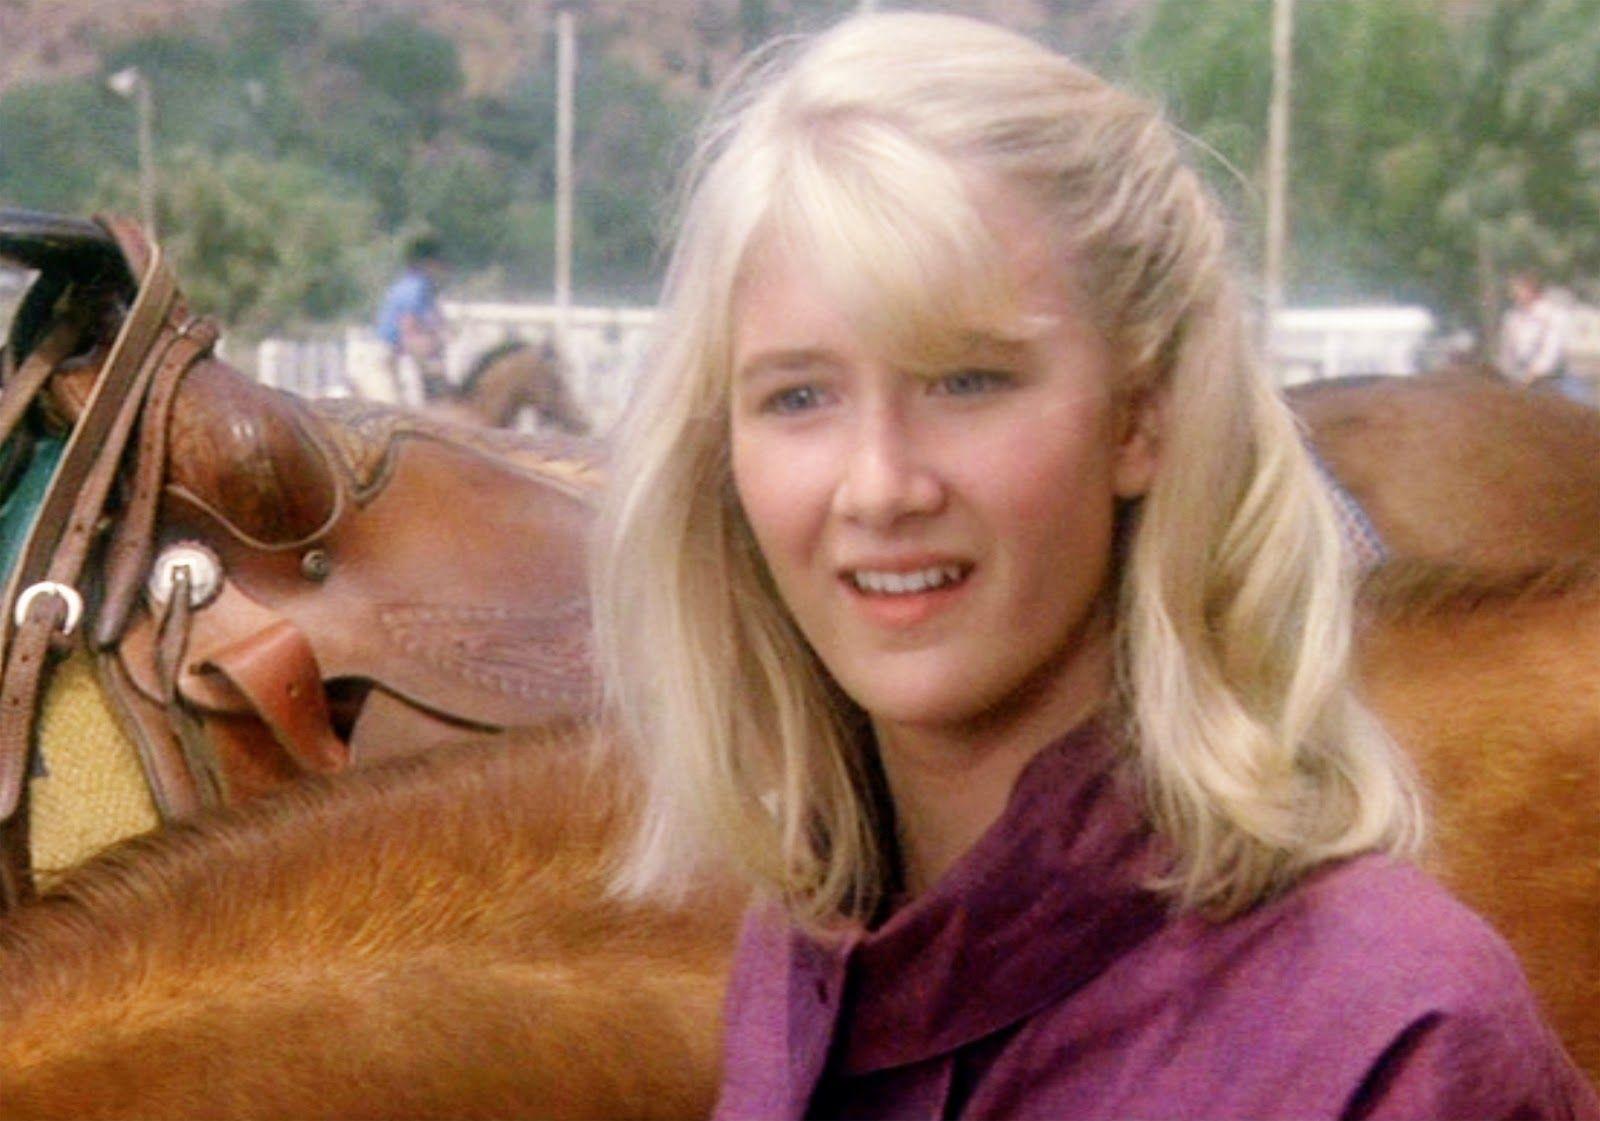 Laura Dern is a Great Actress.How Many of Her Films Have You